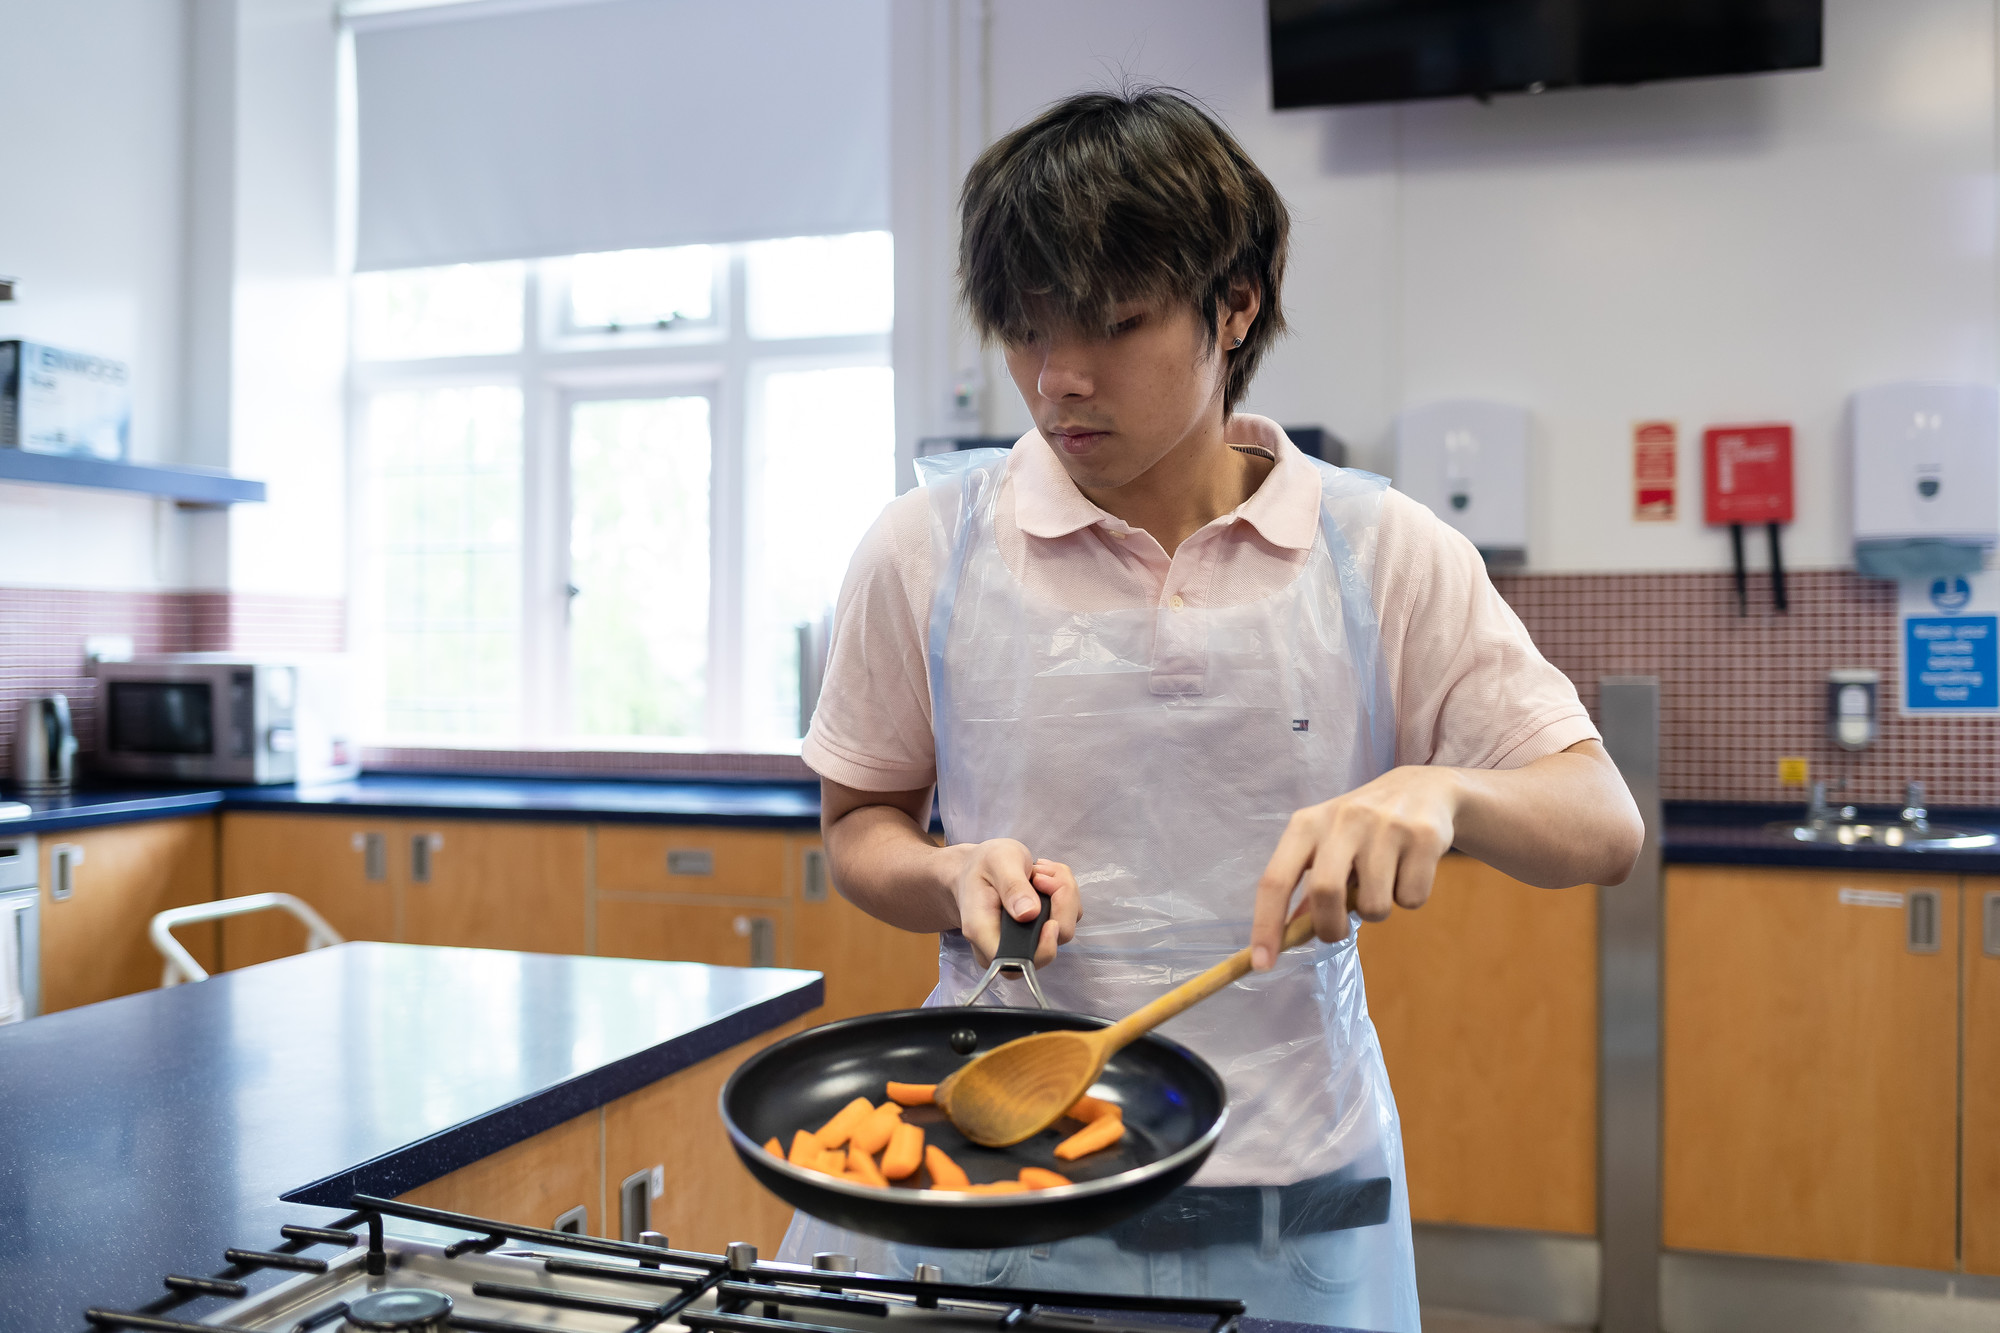 Student cooking a meal, holding a wooden spoon with one hand and a frying pan with the other